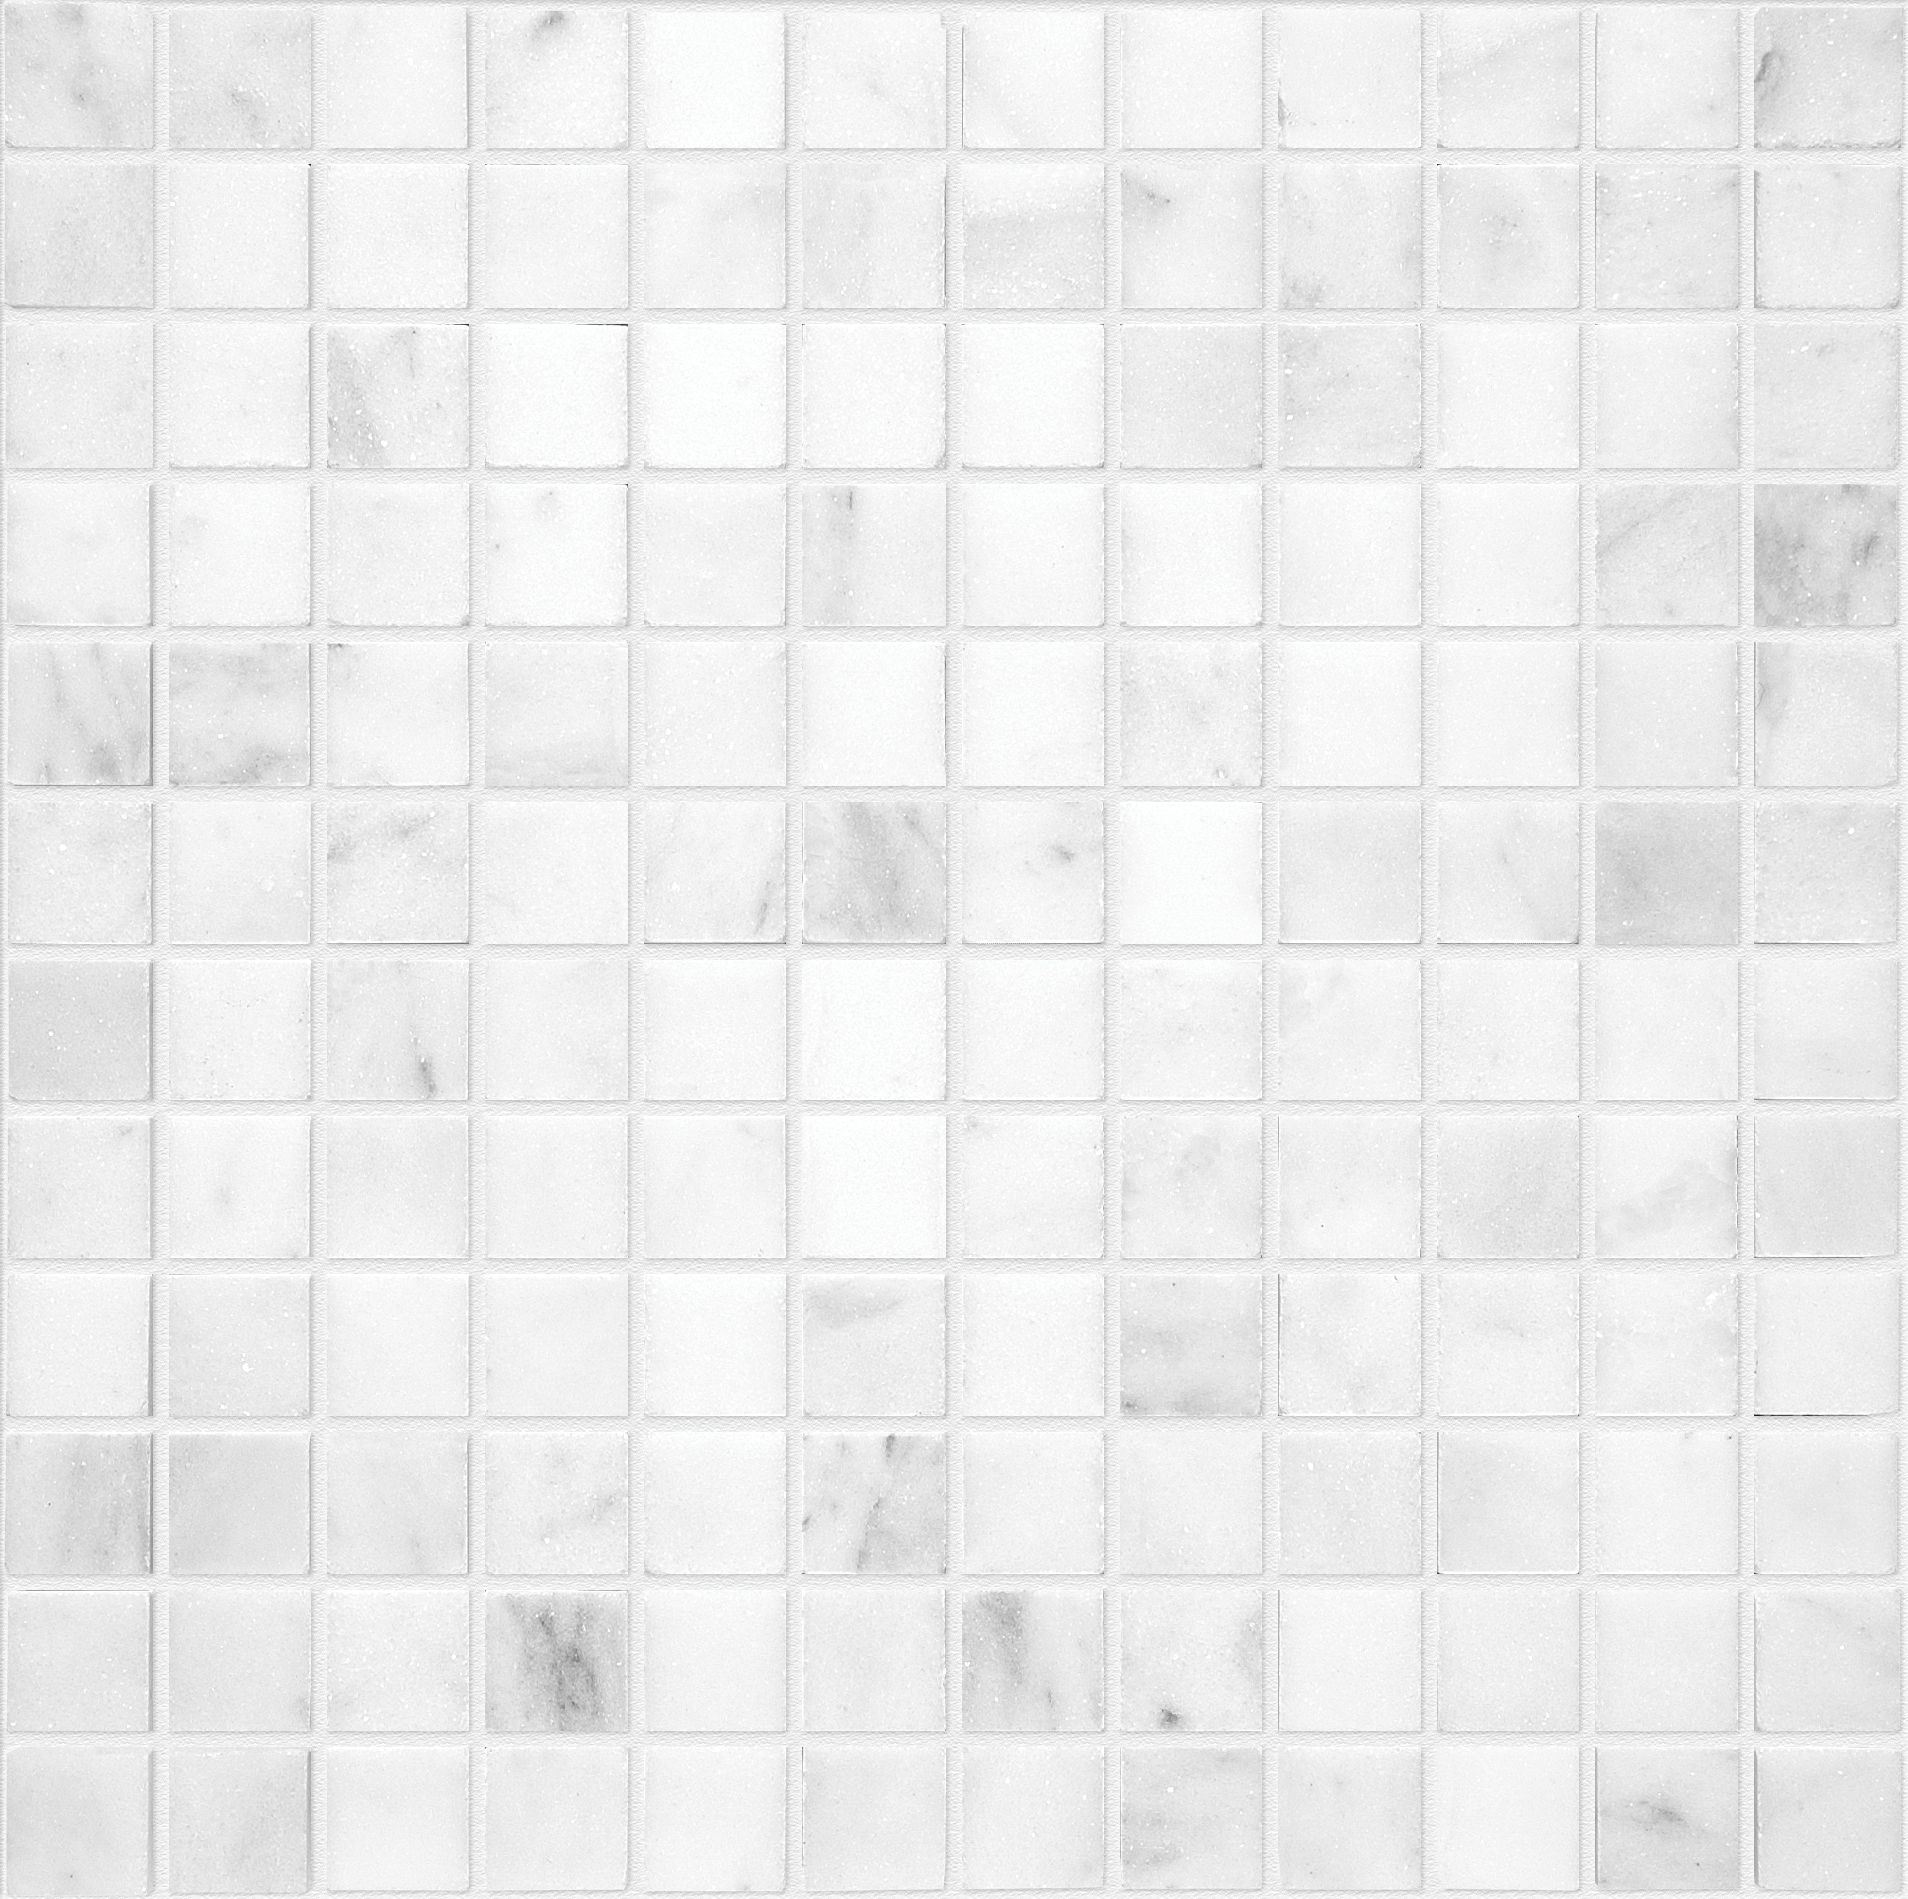 marble straight stack 1x1-inch pattern natural stone mosaic from bianco venatino anatolia collection distributed by surface group international polished finish straight edge edge mesh shape